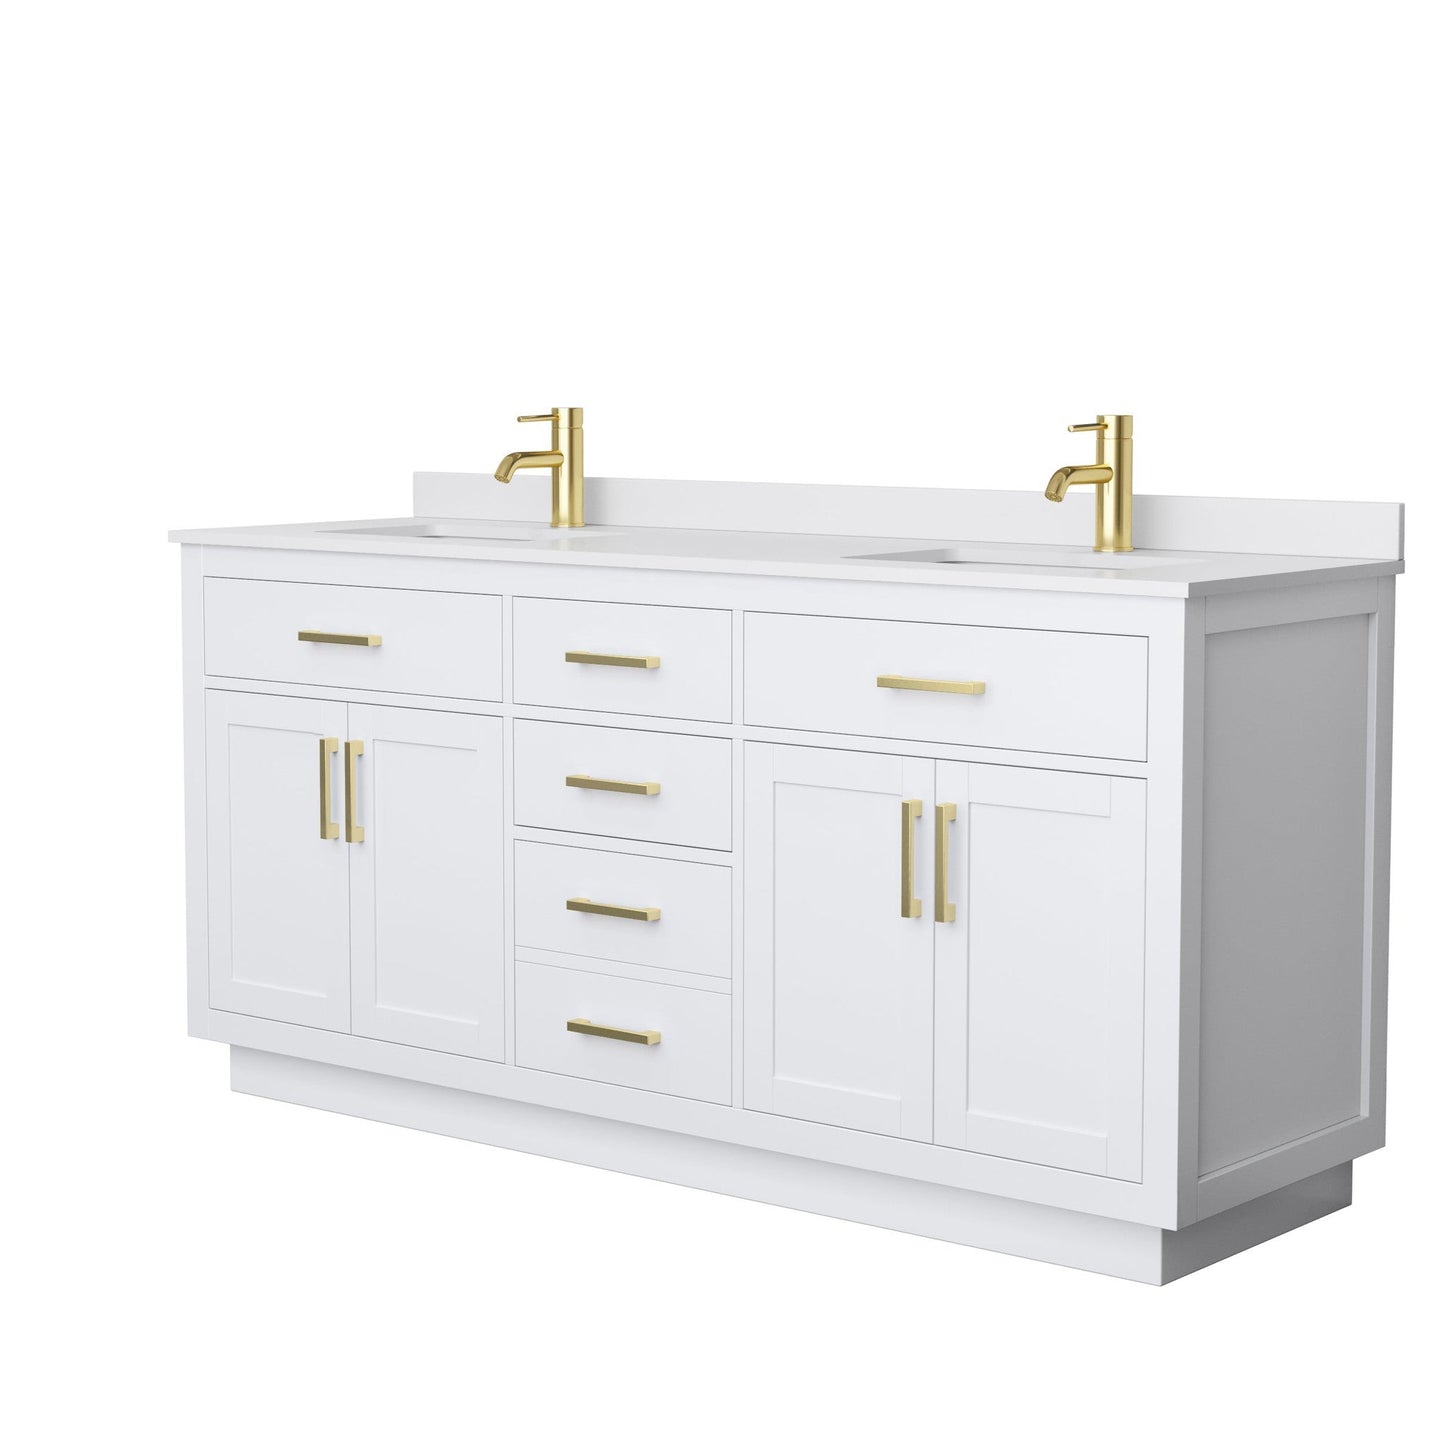 Beckett 72" Double Bathroom Vanity With Toe Kick in White, White Cultured Marble Countertop, Undermount Square Sinks, Brushed Gold Trim